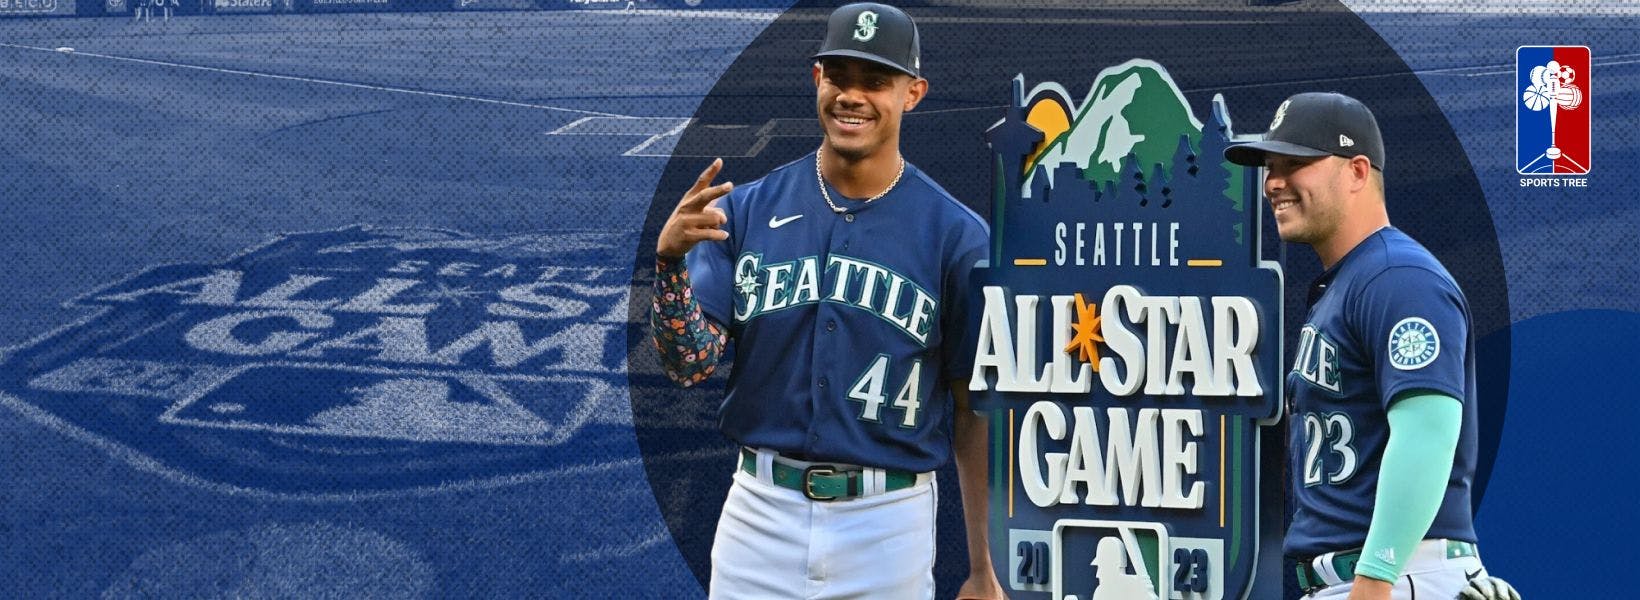 MLB All-Star Game 2023 Logo with the Seattle Mariners